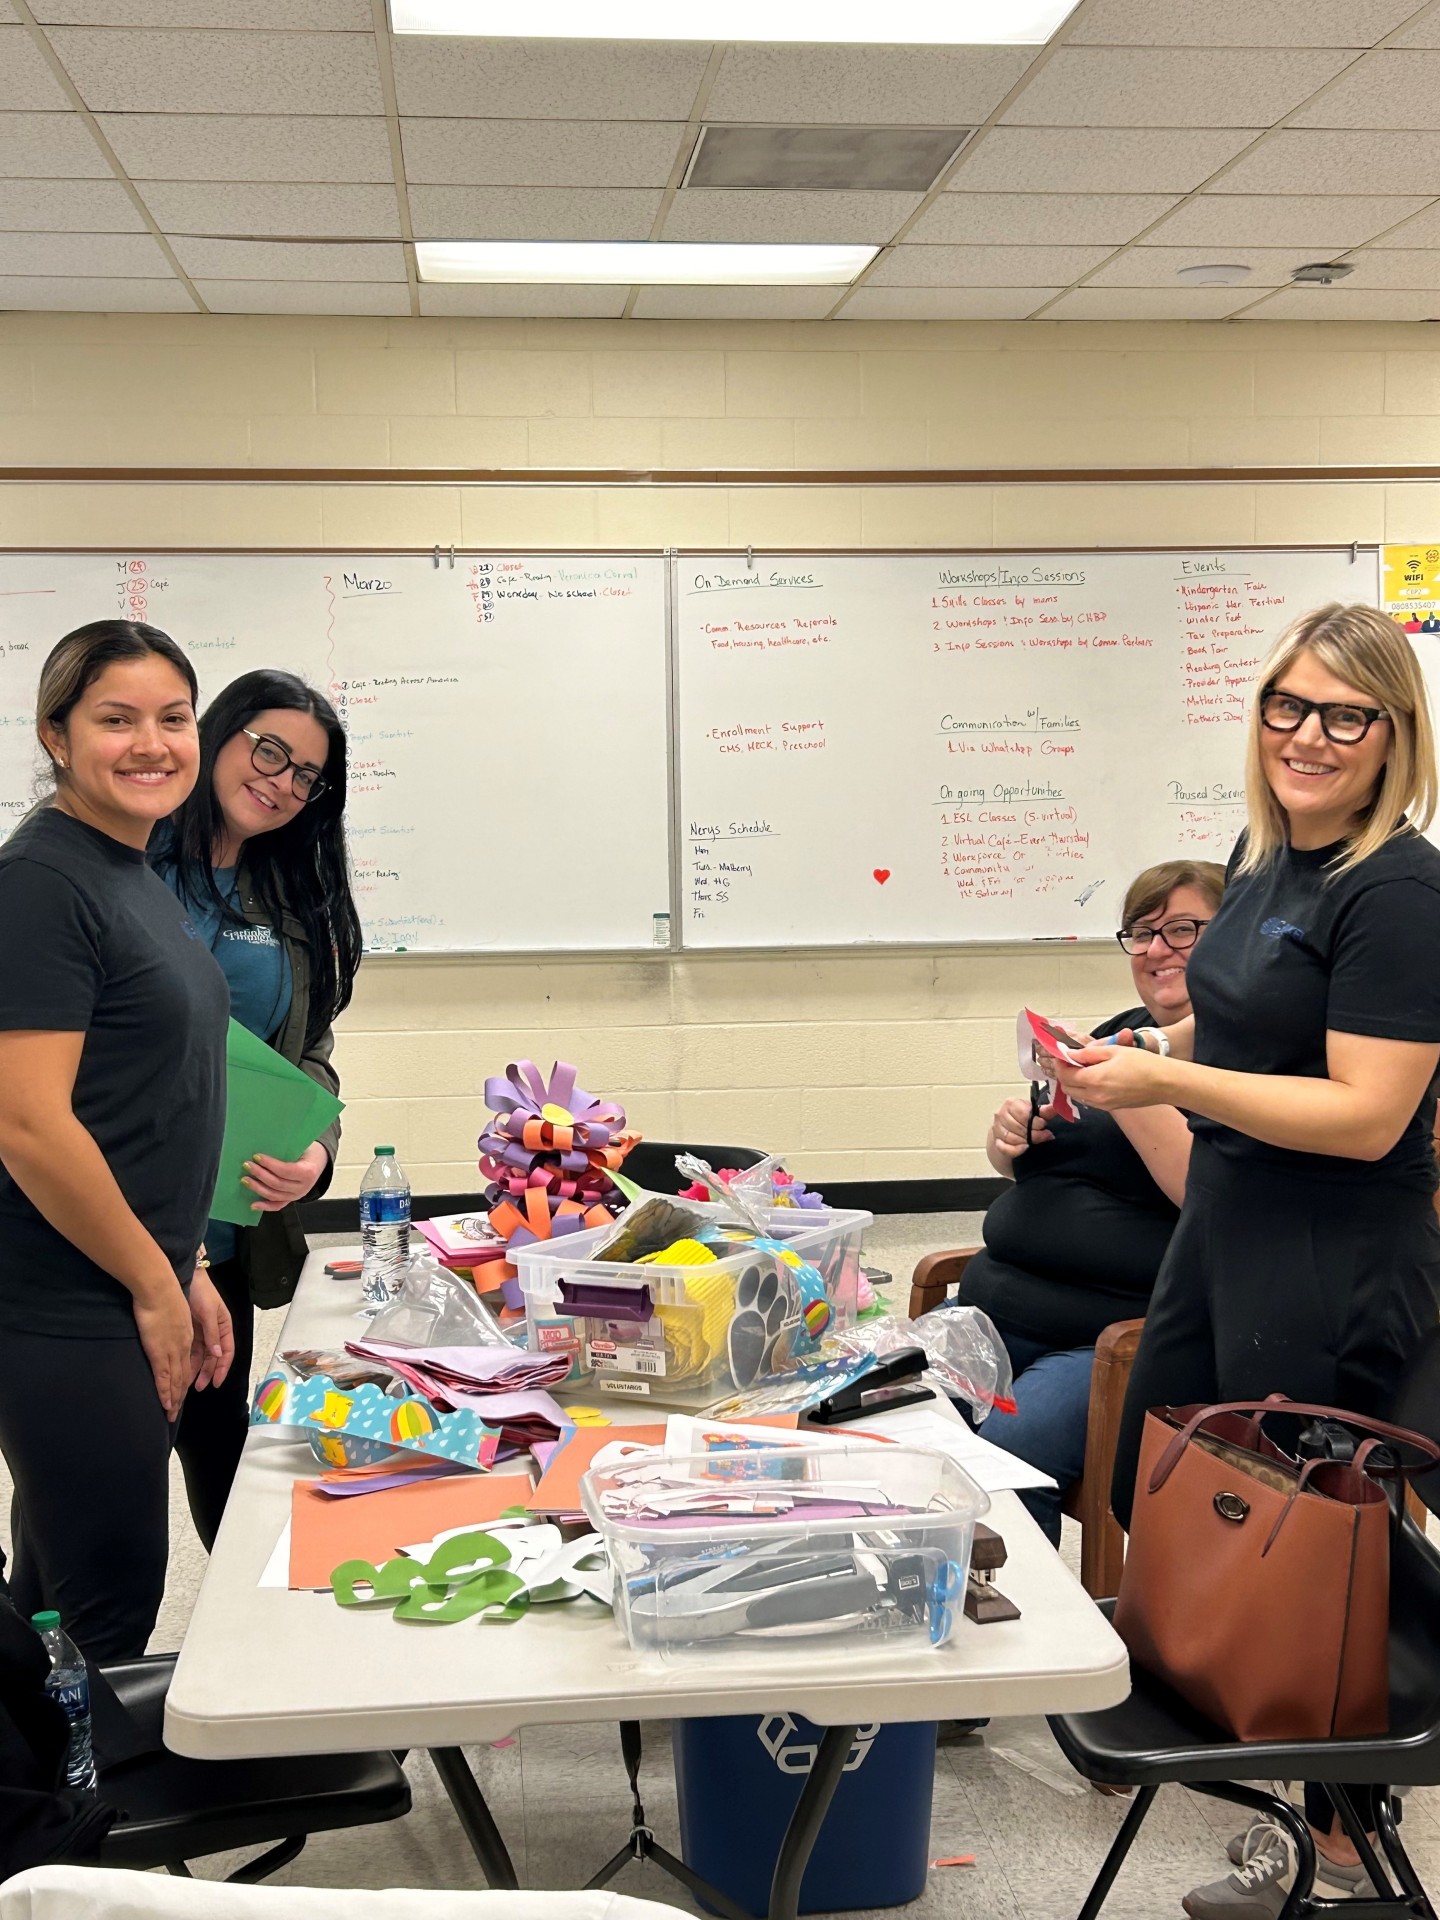 Members of the Garfinkel Immigration Law Firm staff working on items for a bulletin board. 